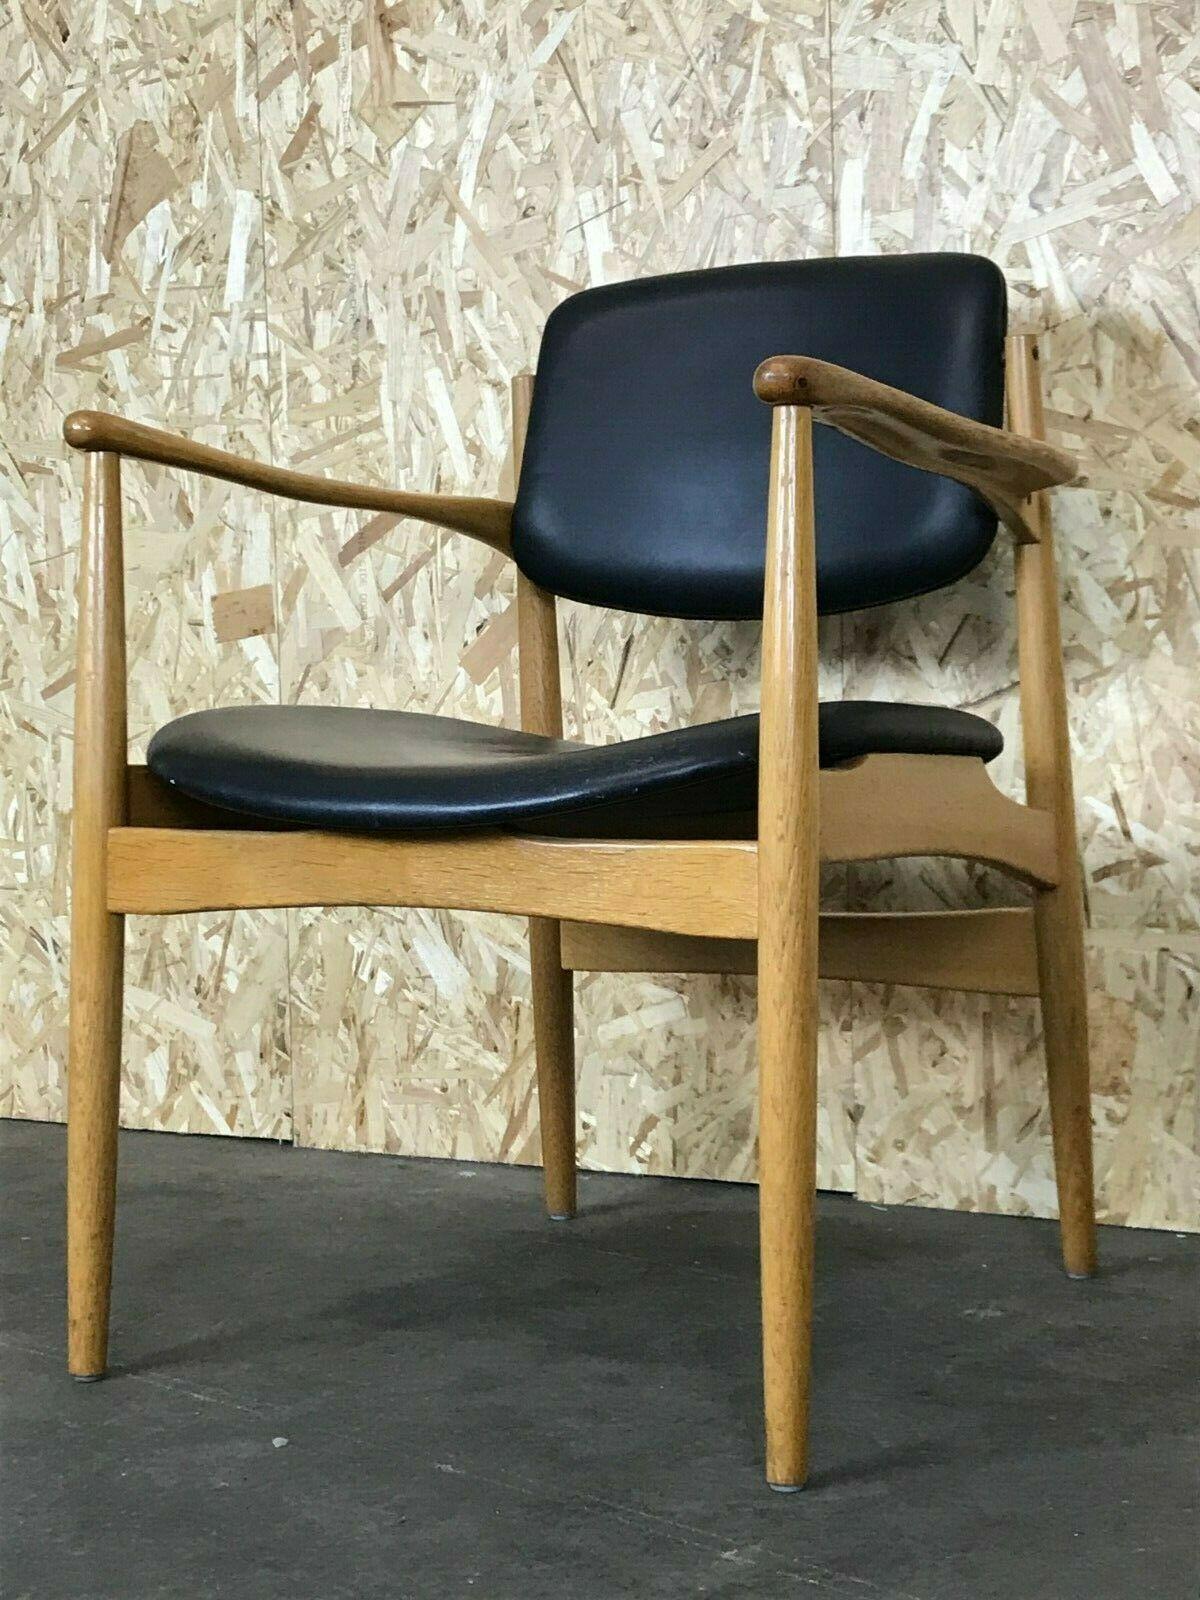 60s 70s dining chair arm chair Danish Design Oak Eiche Denmark 60s

Object: armchair

Manufacturer:

Condition: good

Age: around 1960-1970

Dimensions:

61.5cm x 63cm x 82cm
Seat height = 42cm

Other notes:

The pictures serve as